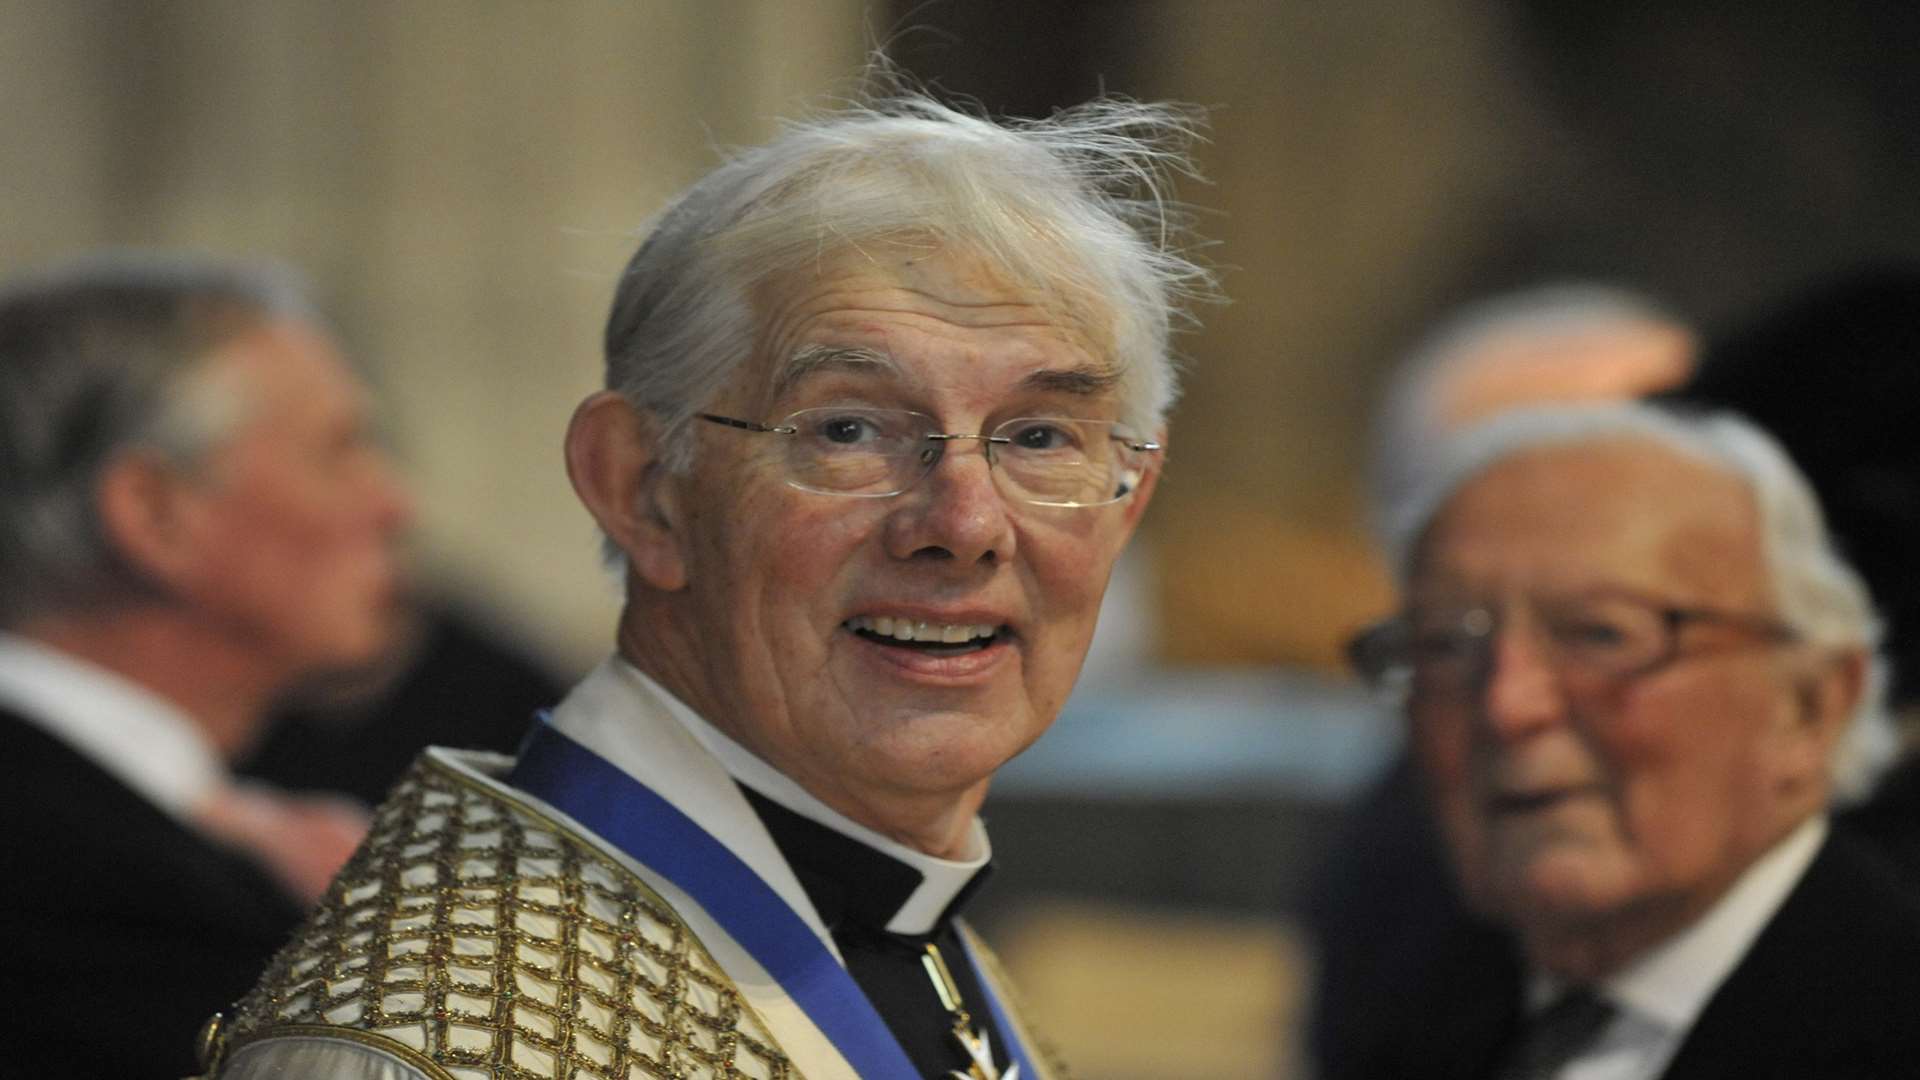 Dean of Canterbury, Robert Willis, will preside over the service